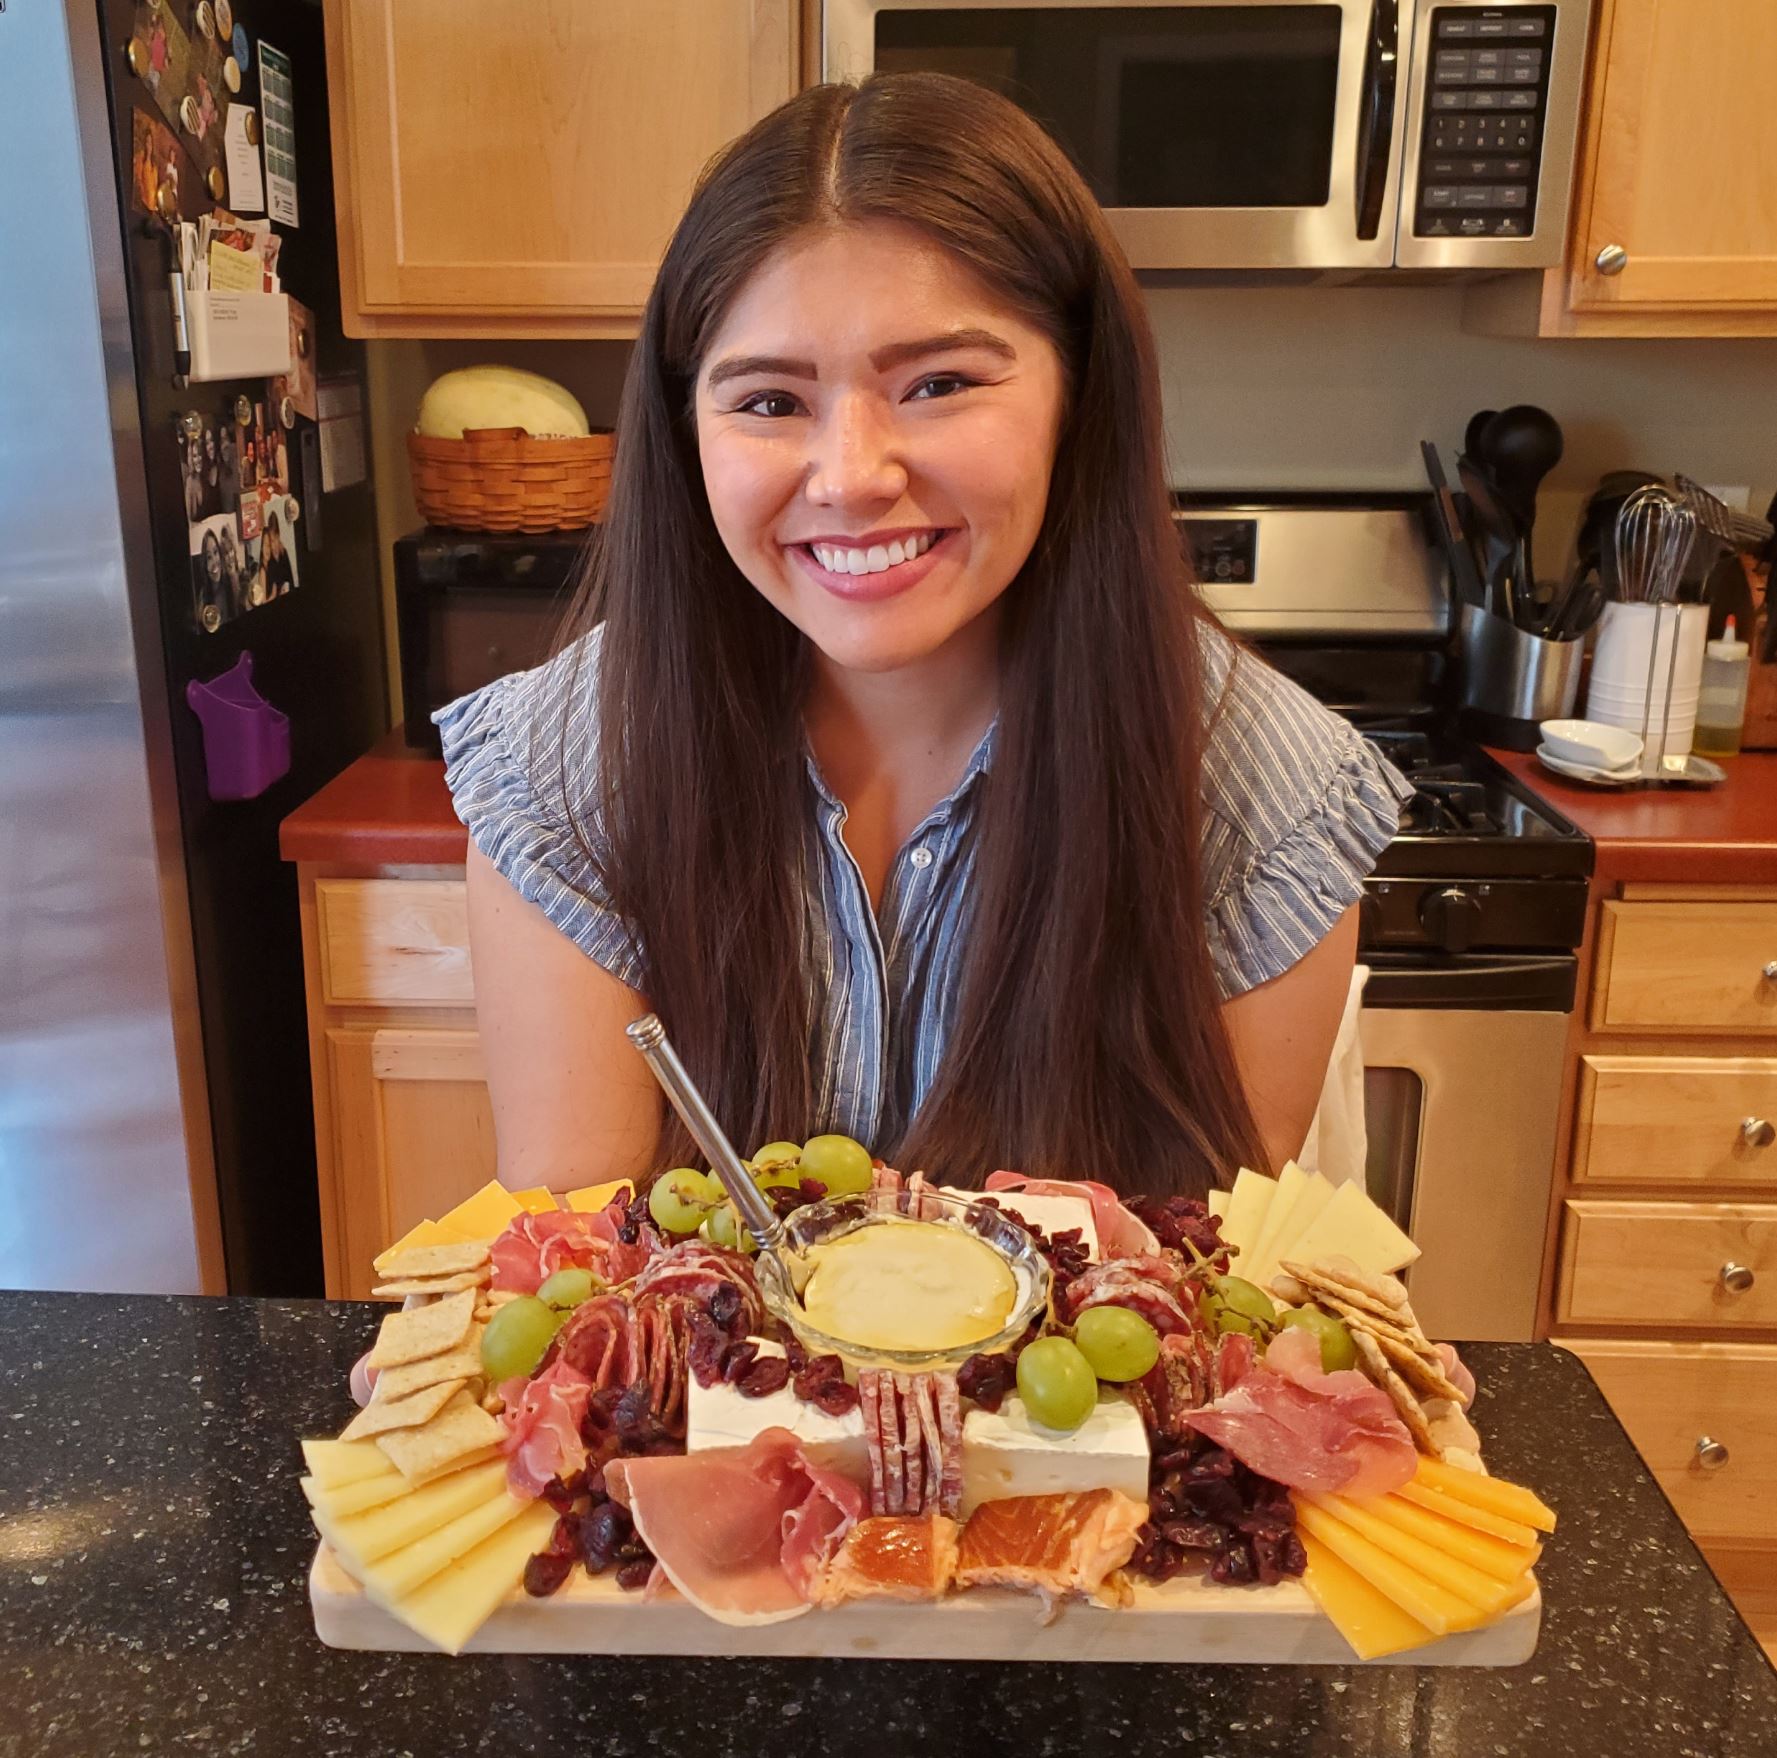 A picture of me, a smiling brunette, hair down. I am holding a charcuterie board. It is filled with prosciutto, salami, smoked salmon, goat cheese drizzled with honey, brie, craisins, grapes, gounda, merlot cheese, crackers and marcona almonds. In the background is my kitchen, oven, microwave and fridge. You can see kitchen utensils in a cup on the counter.